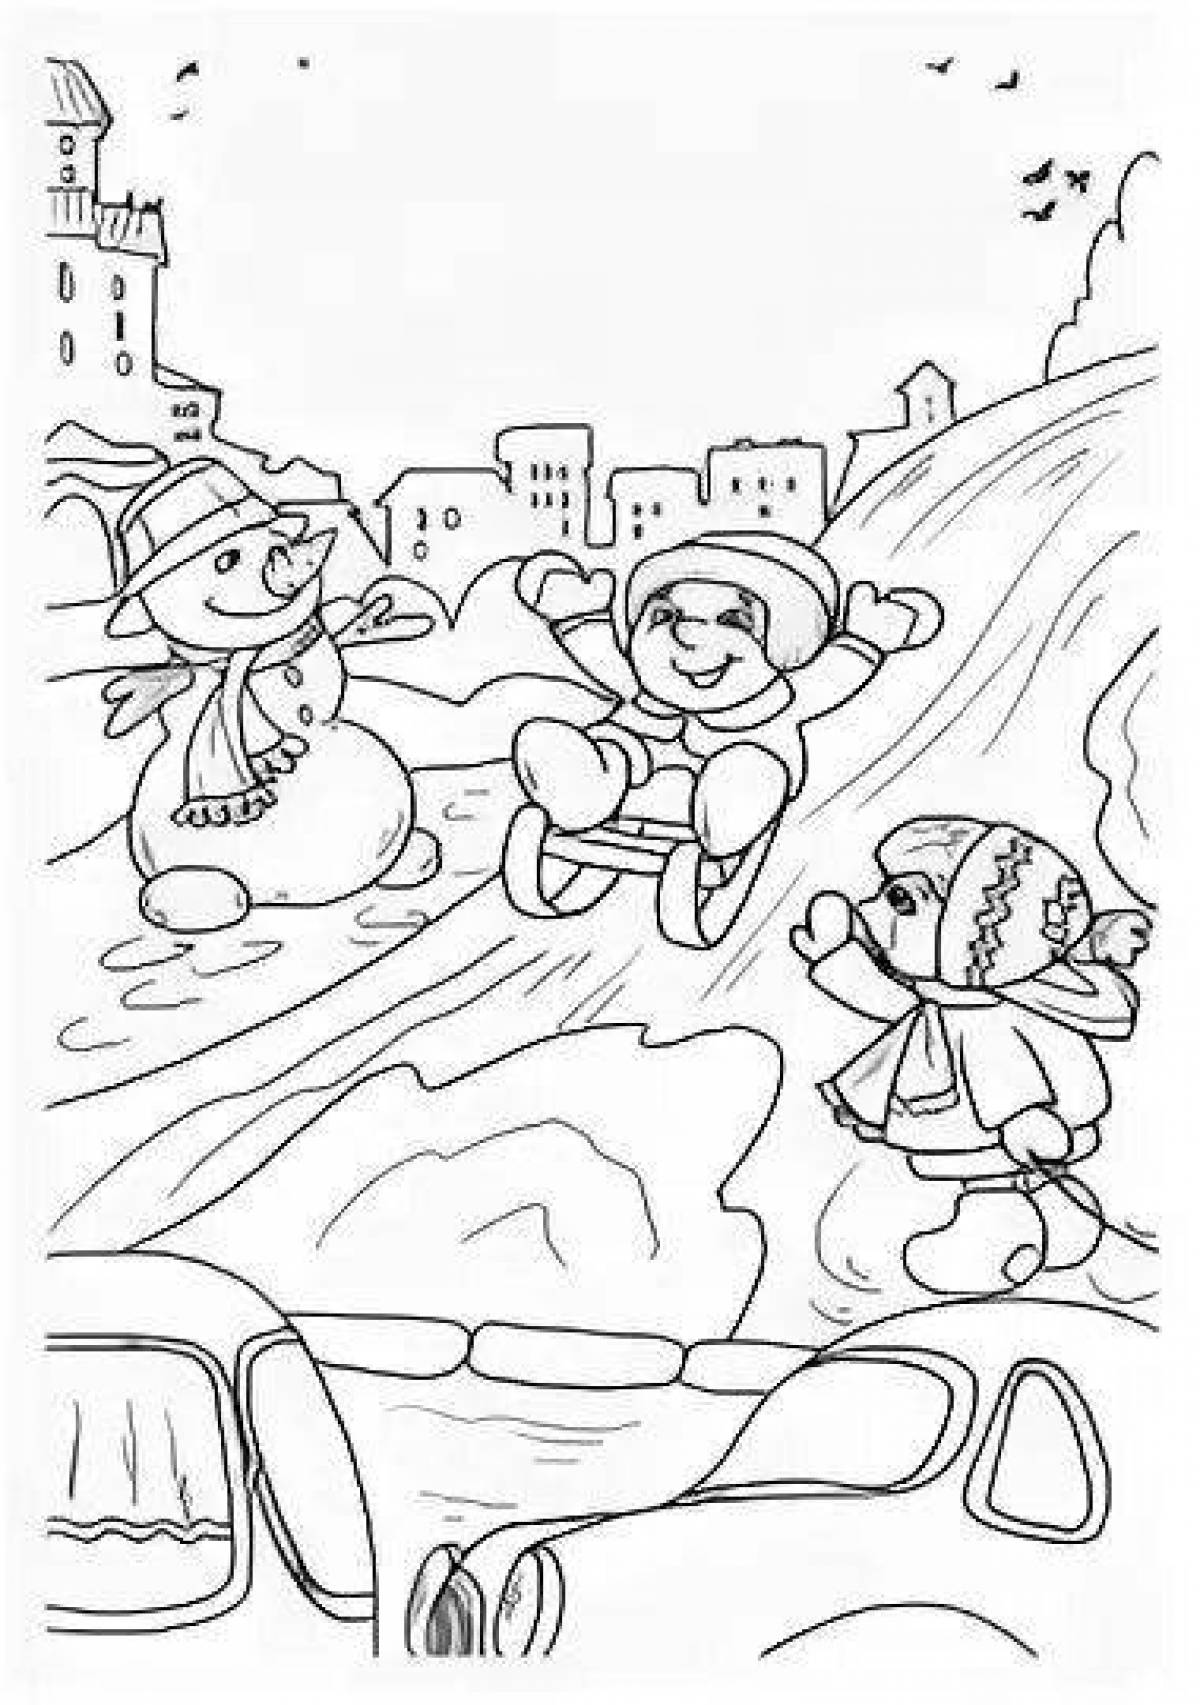 Animated coloring book traffic rules in winter